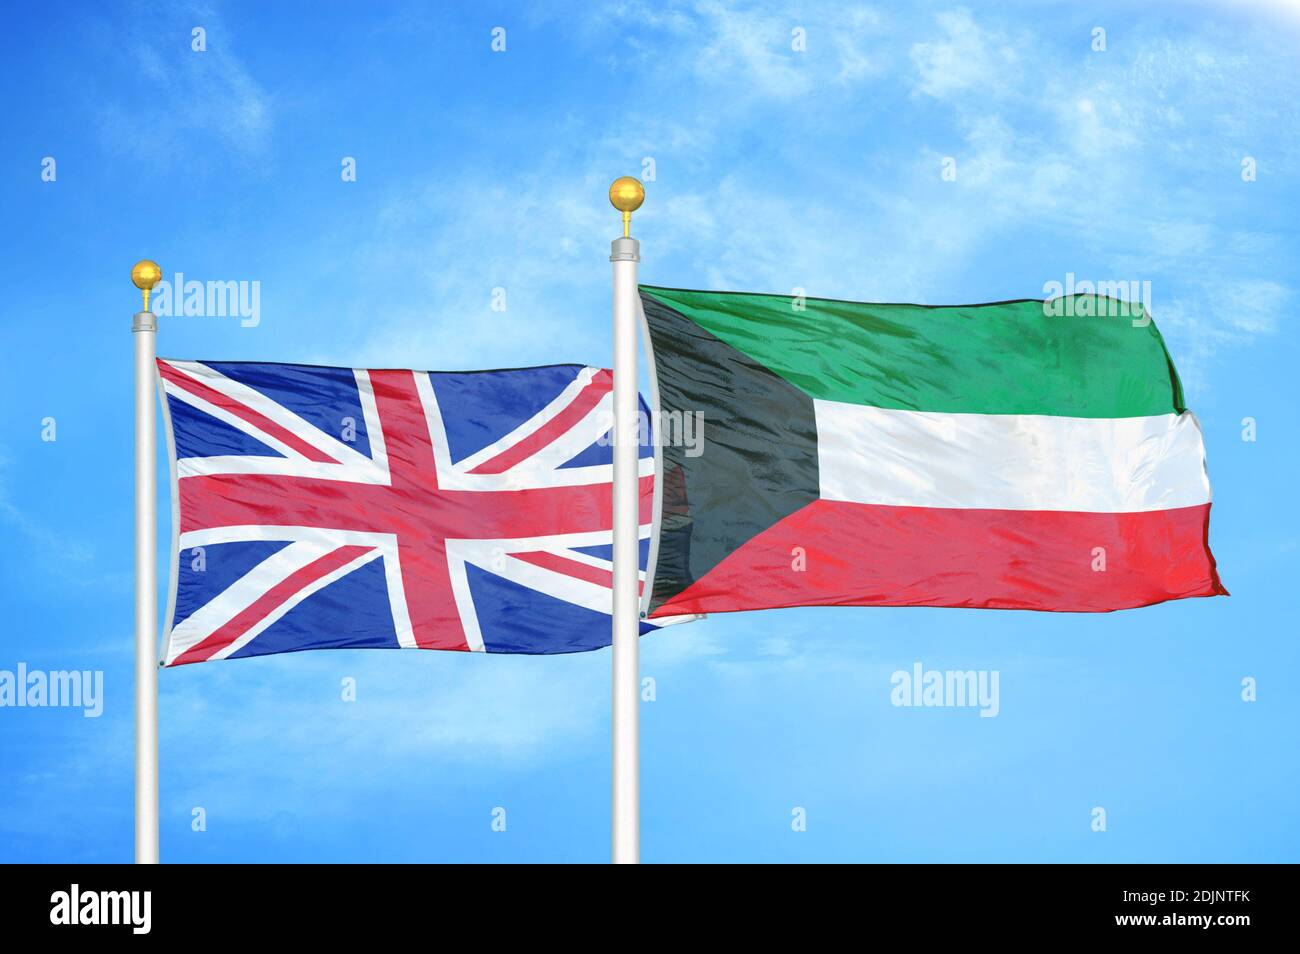 United Kingdom and Kuwait two flags on flagpoles and blue cloudy sky Stock Photo